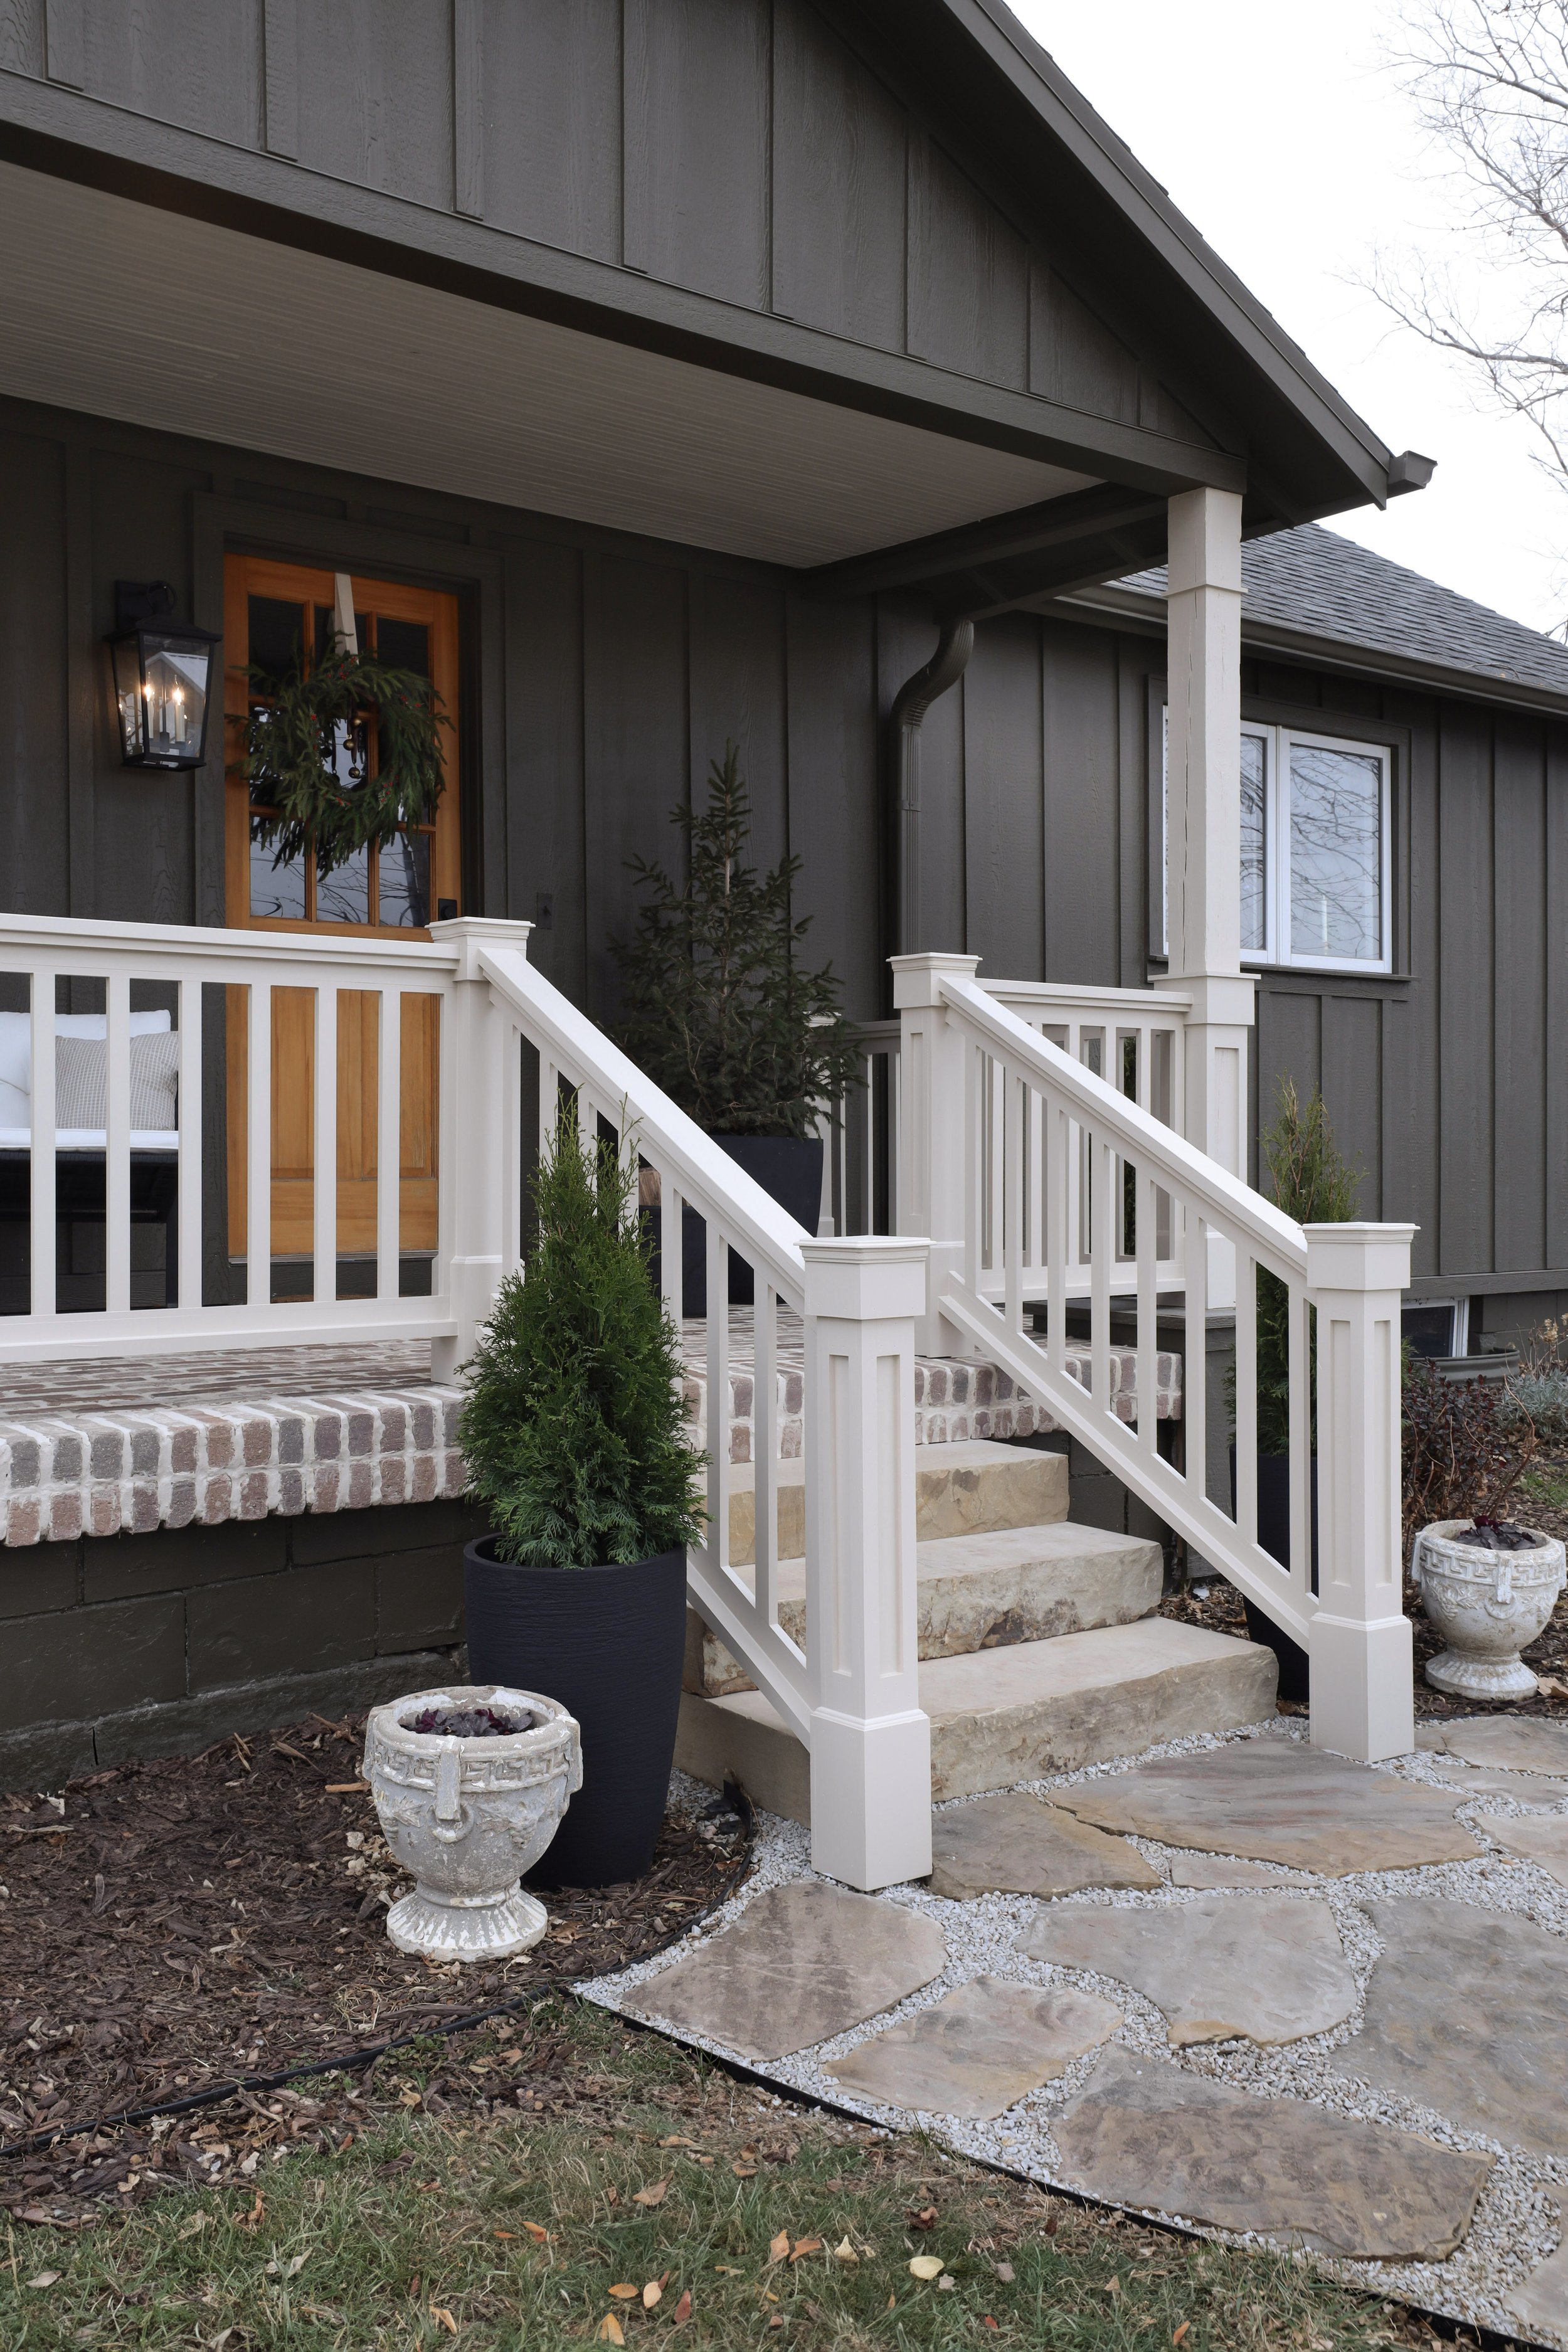 Porch before and after by Nadine Stay | Green exterior paint color. DIY porch brick floor. DIY flagstone path. DIY custom porch railing. Beige paint color for exterior. A craftsman porch railing. Box trim on porch railing posts.